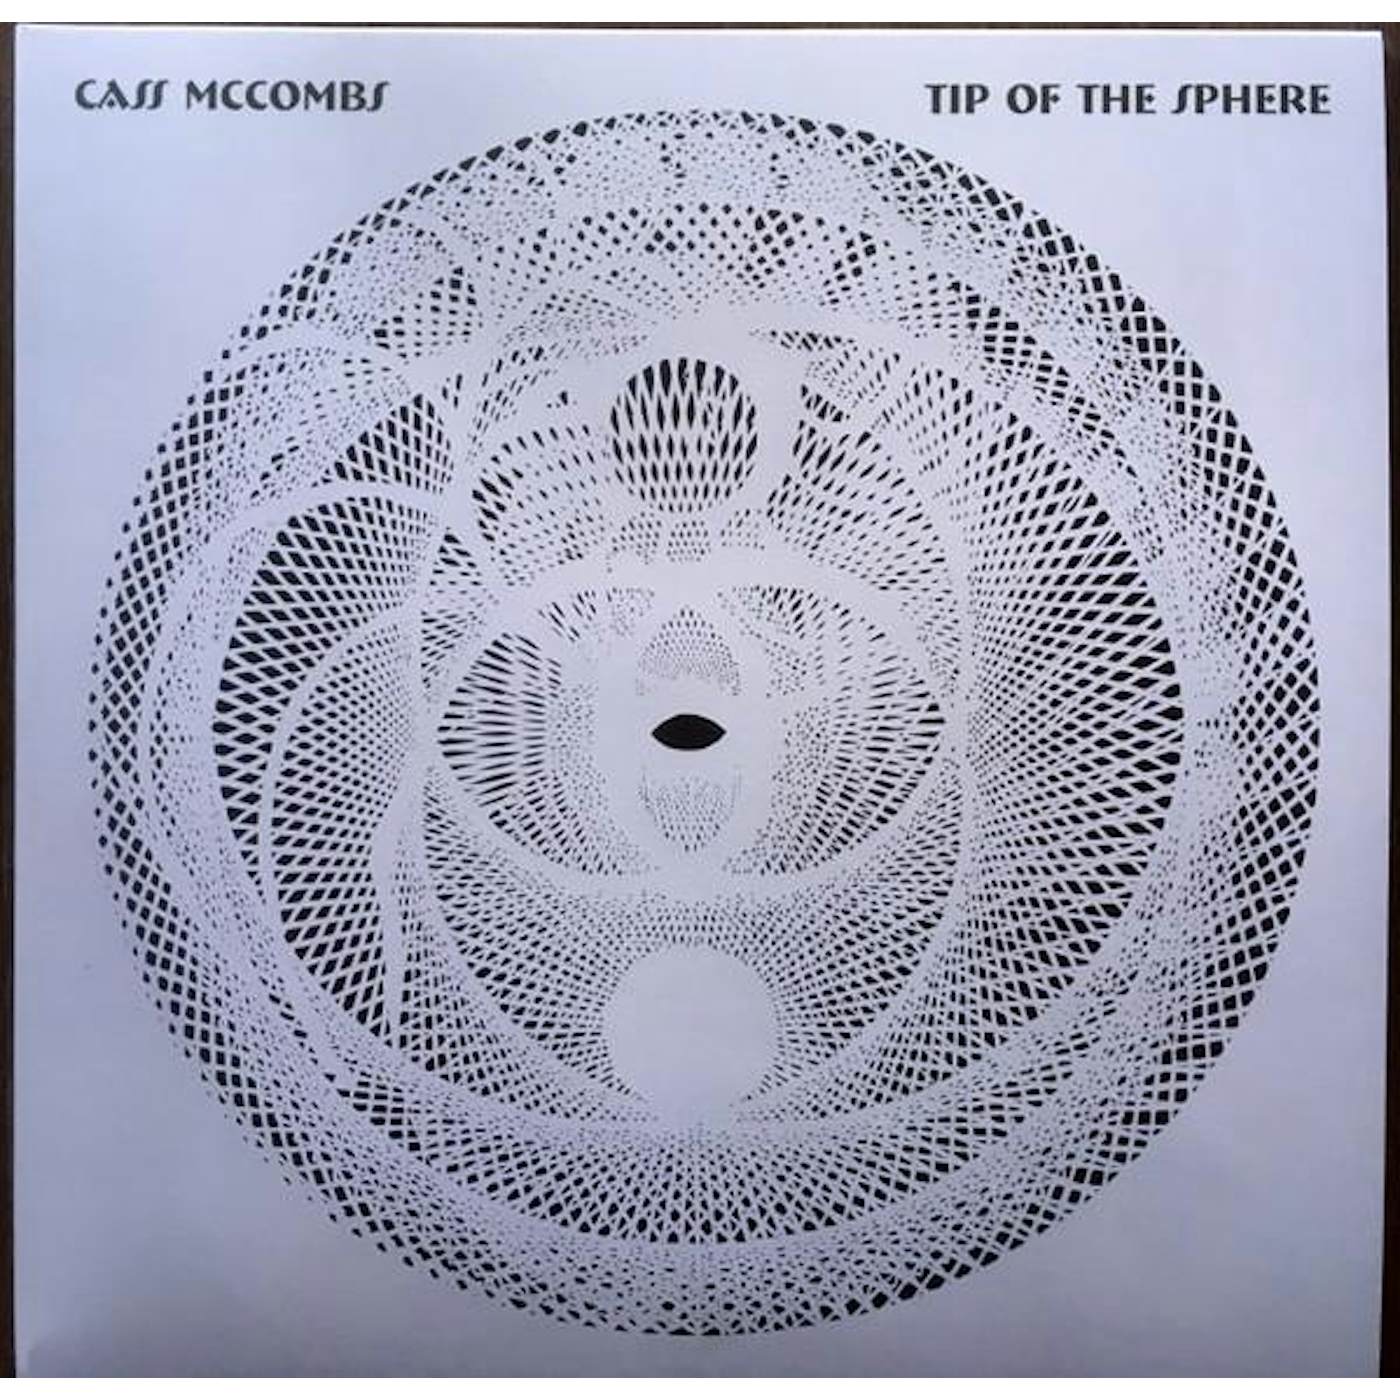 Cass McCombs TIP OF THE SPHERE Vinyl Record